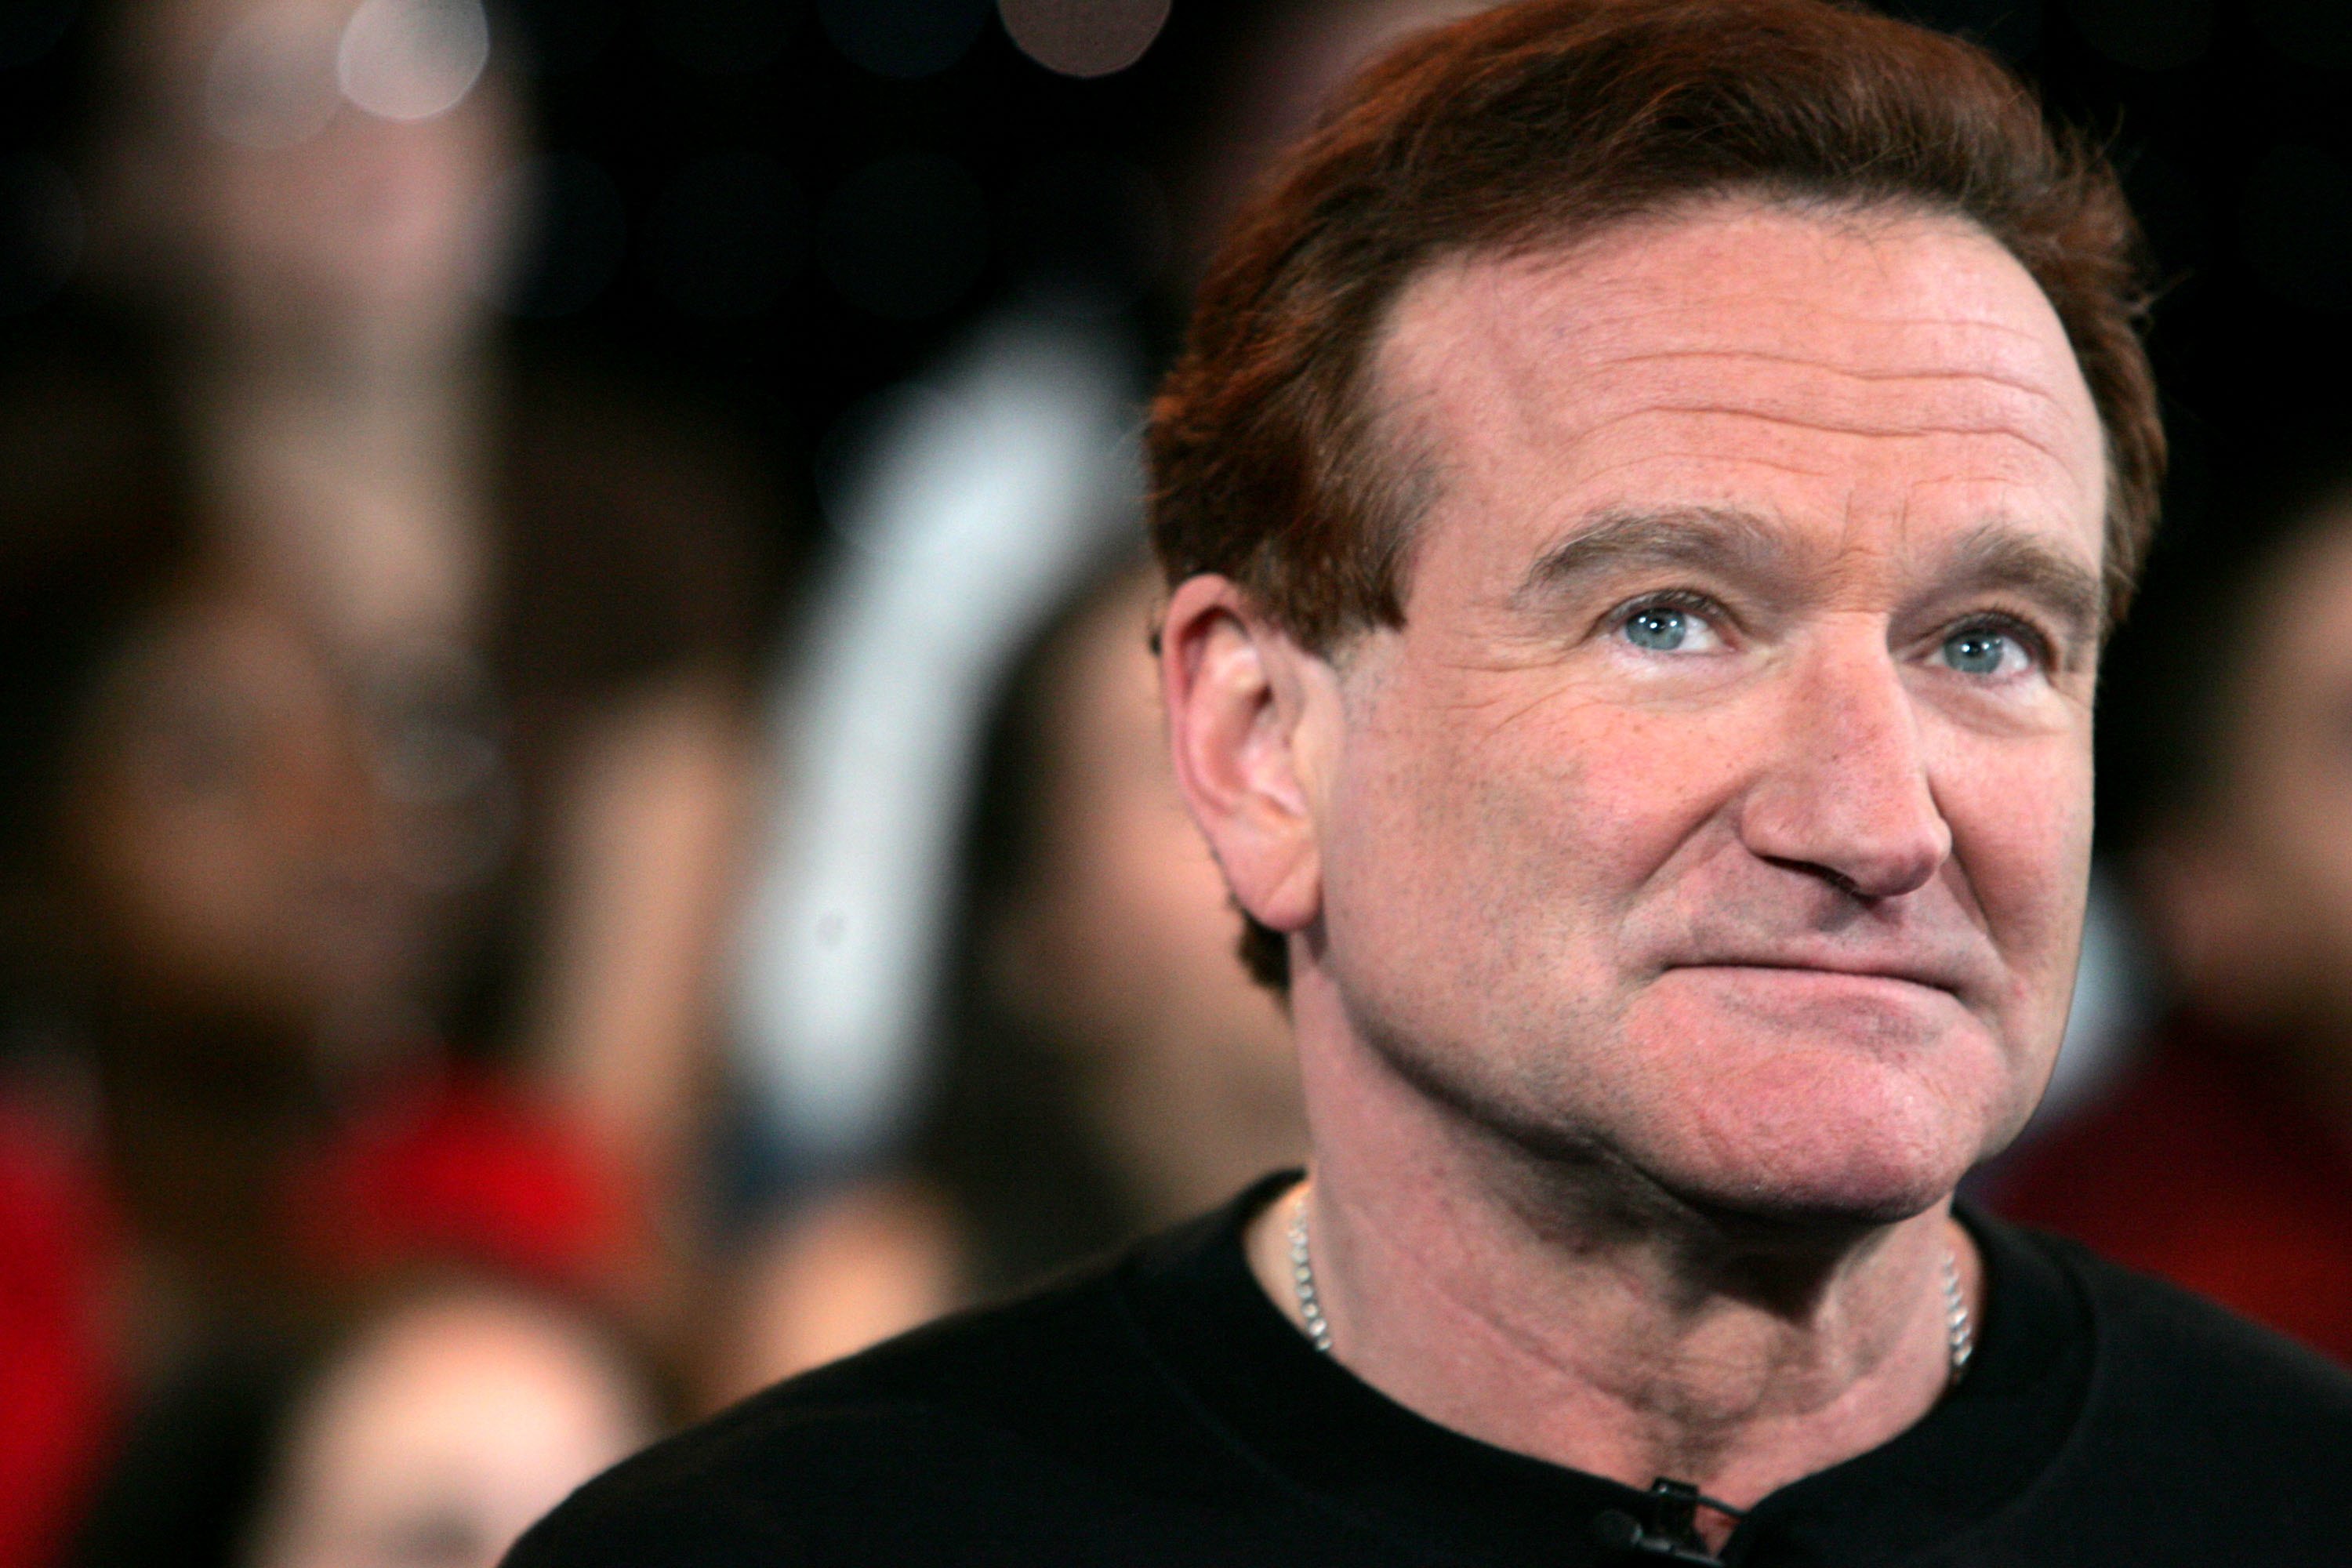 Robin Williams at the MTV Times Square Studios, on April 27, 2006, in New York City | Source: Getty Images